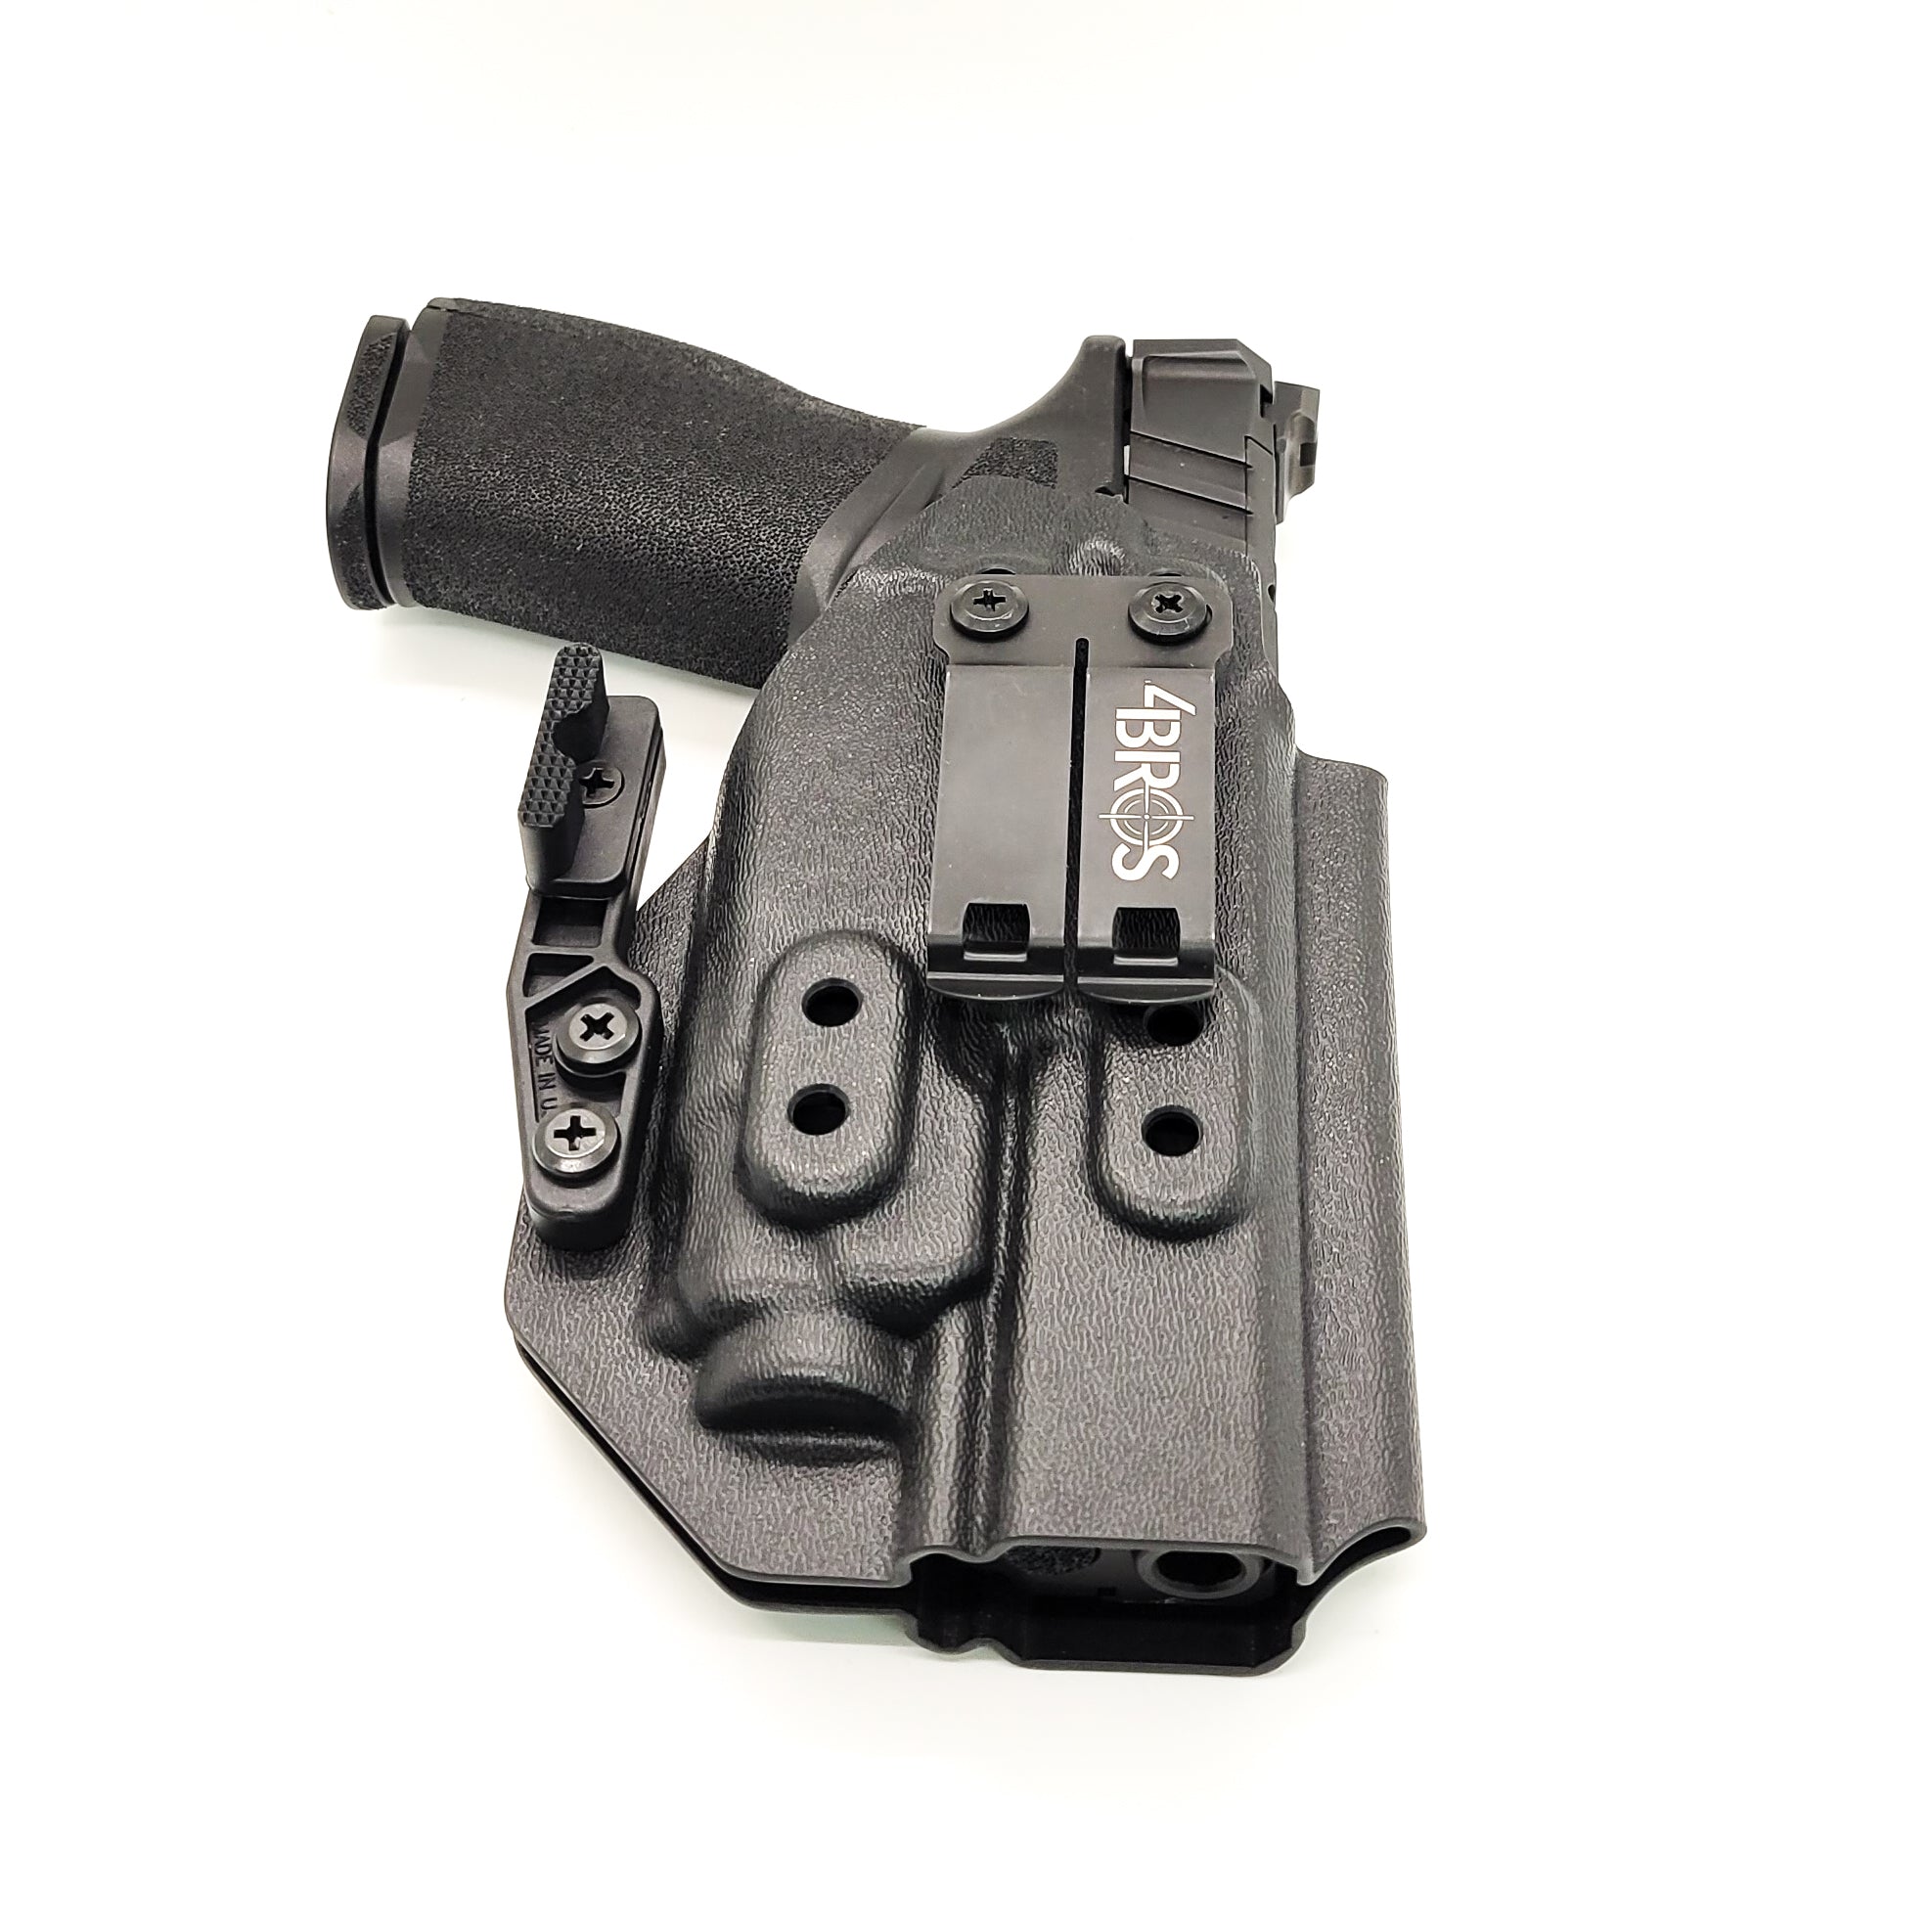 For the best IWB Inside Waistband Holster designed to fit the Springfield Armory Echelon and Streamlight TLR-8A, shop Four Brothers Holsters. Full sweat guard, adjustable retention, clear dor a red dot sight, minimal material & smooth edges to reduce printing. Proudly made in the USA by veterans and law enforcement.